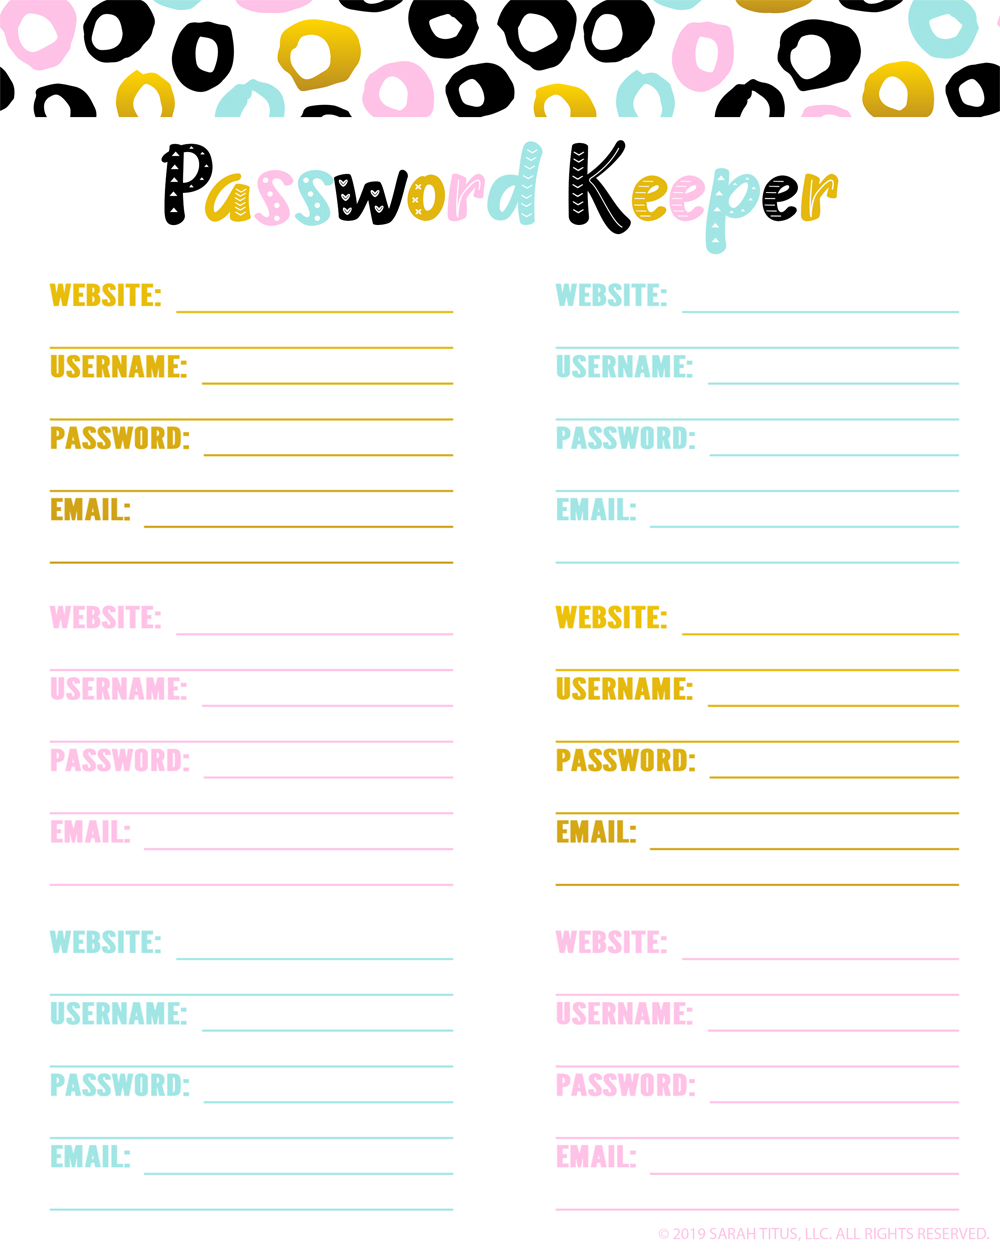 Top Password Keeper Free Printables to Download Instantly - Sarah Titus